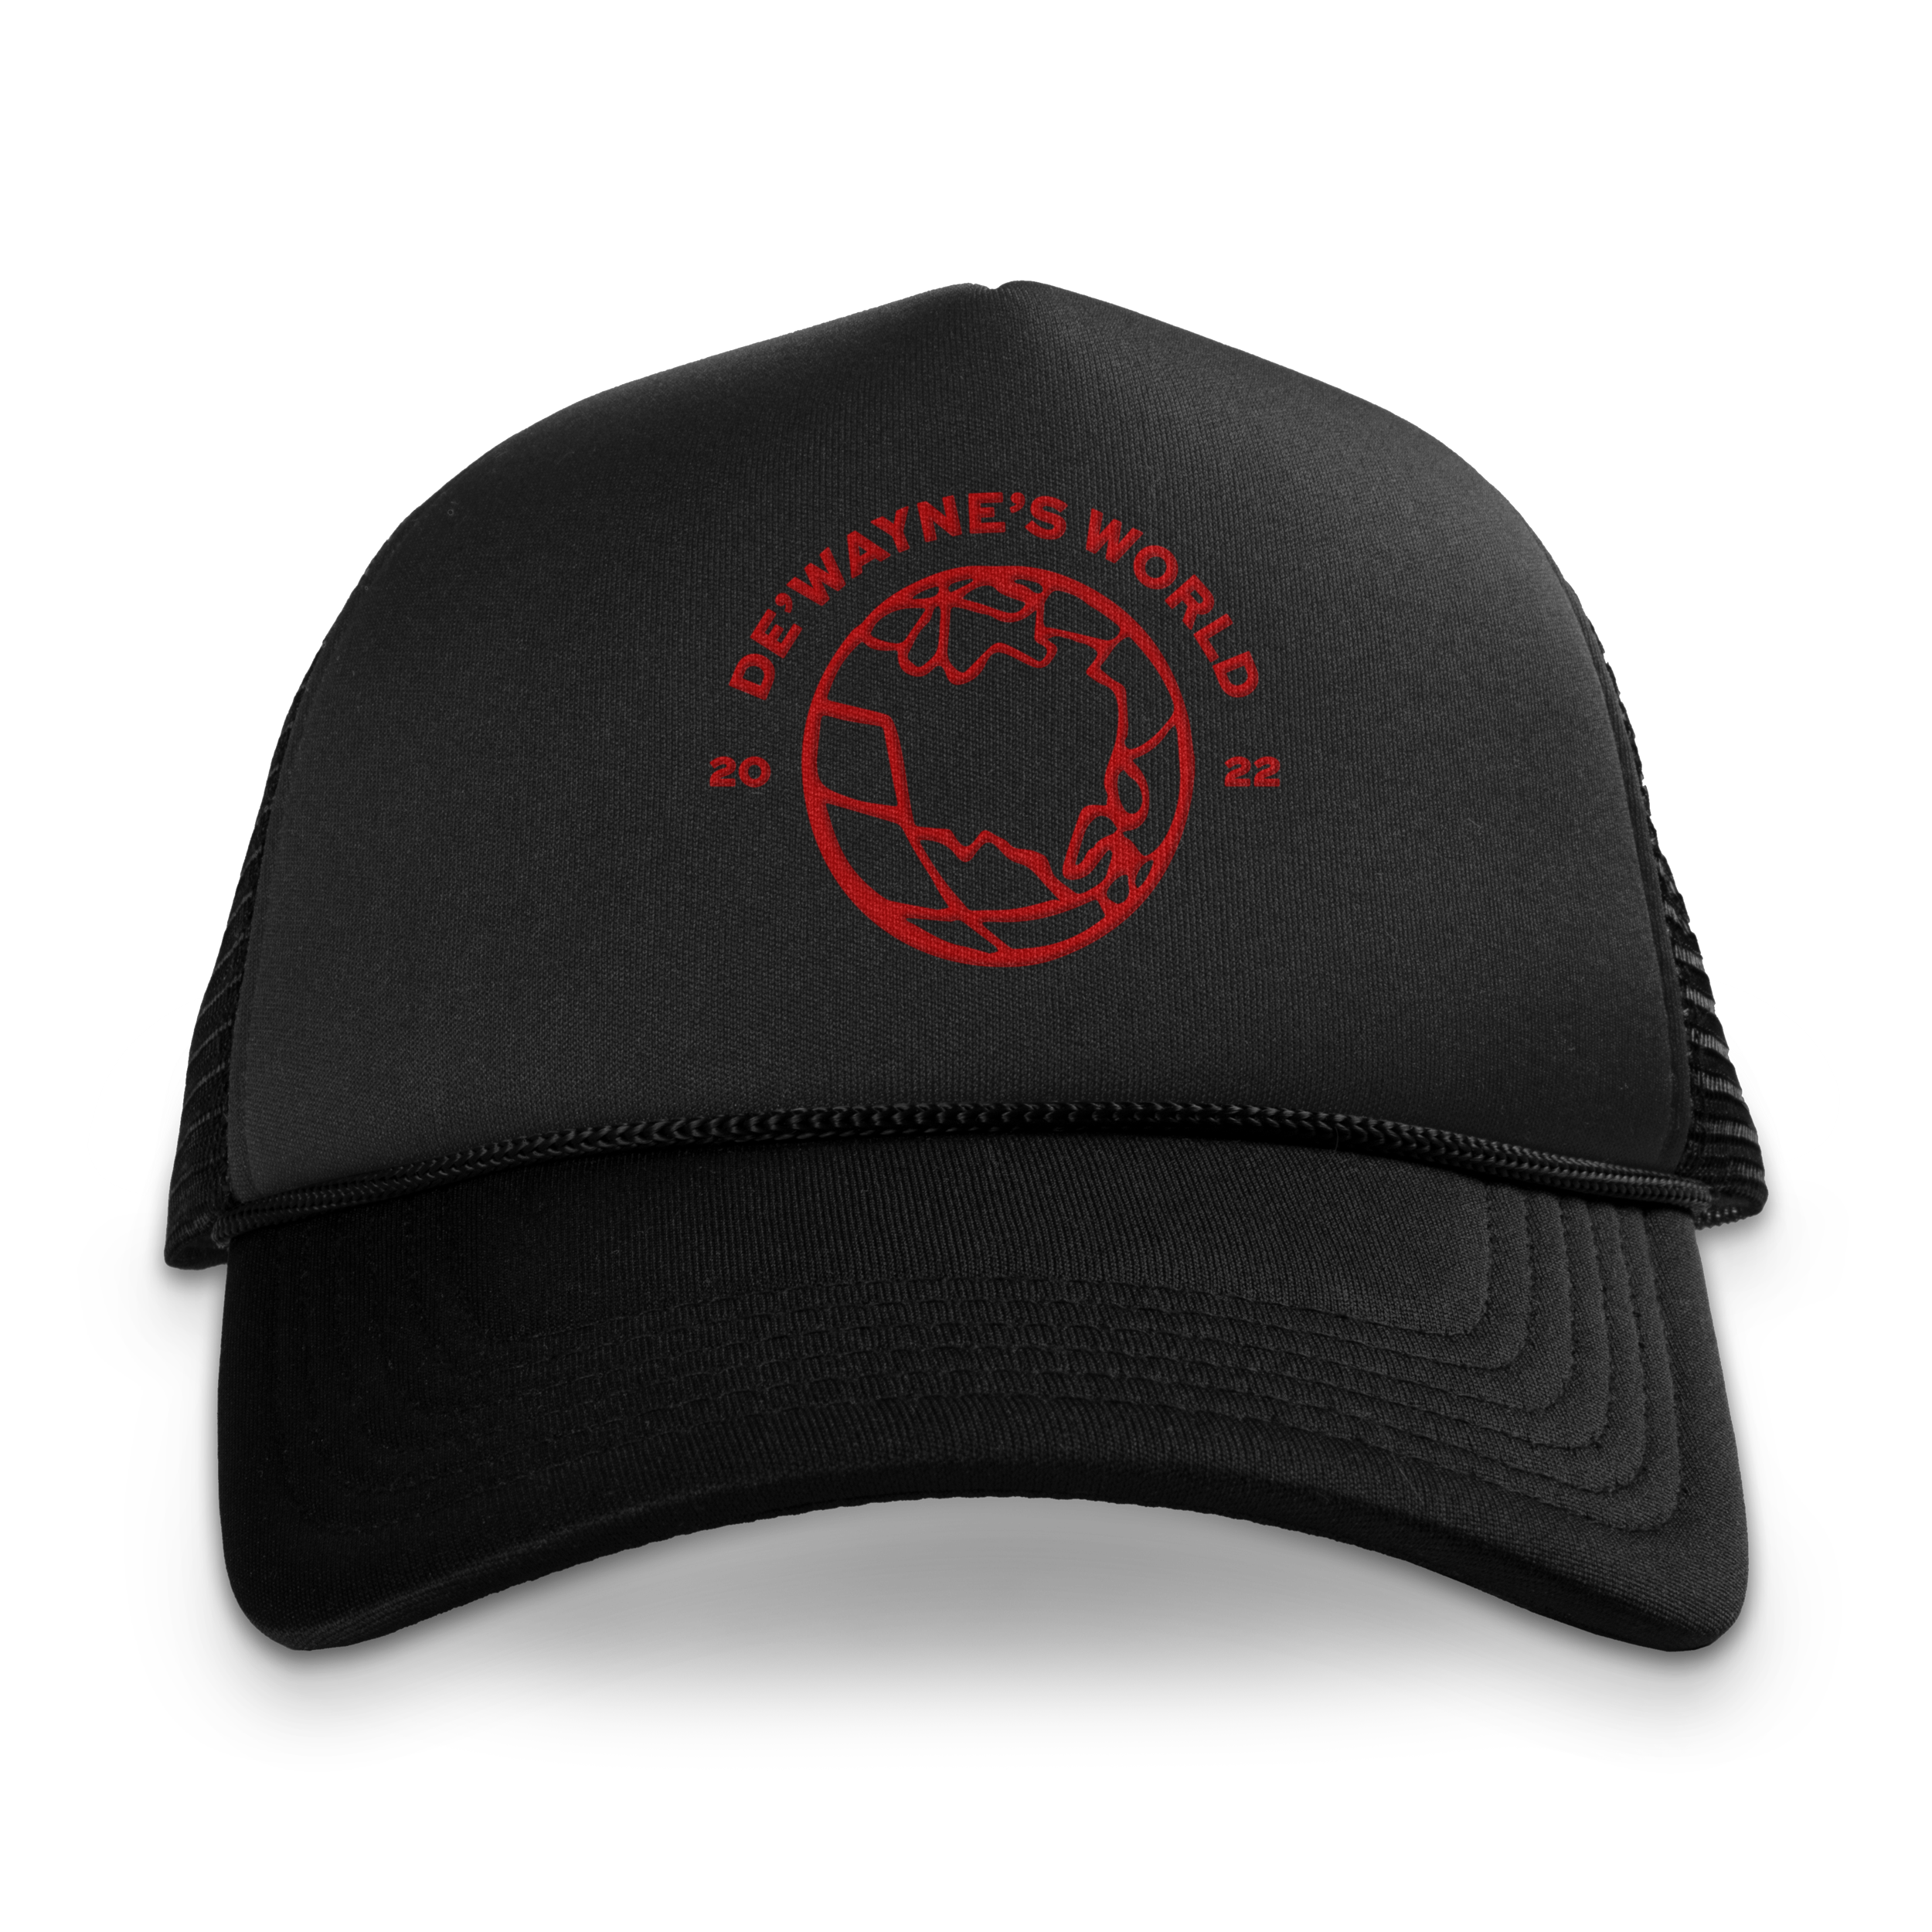 DIE OUT HERE TOUR TRUCKER HAT